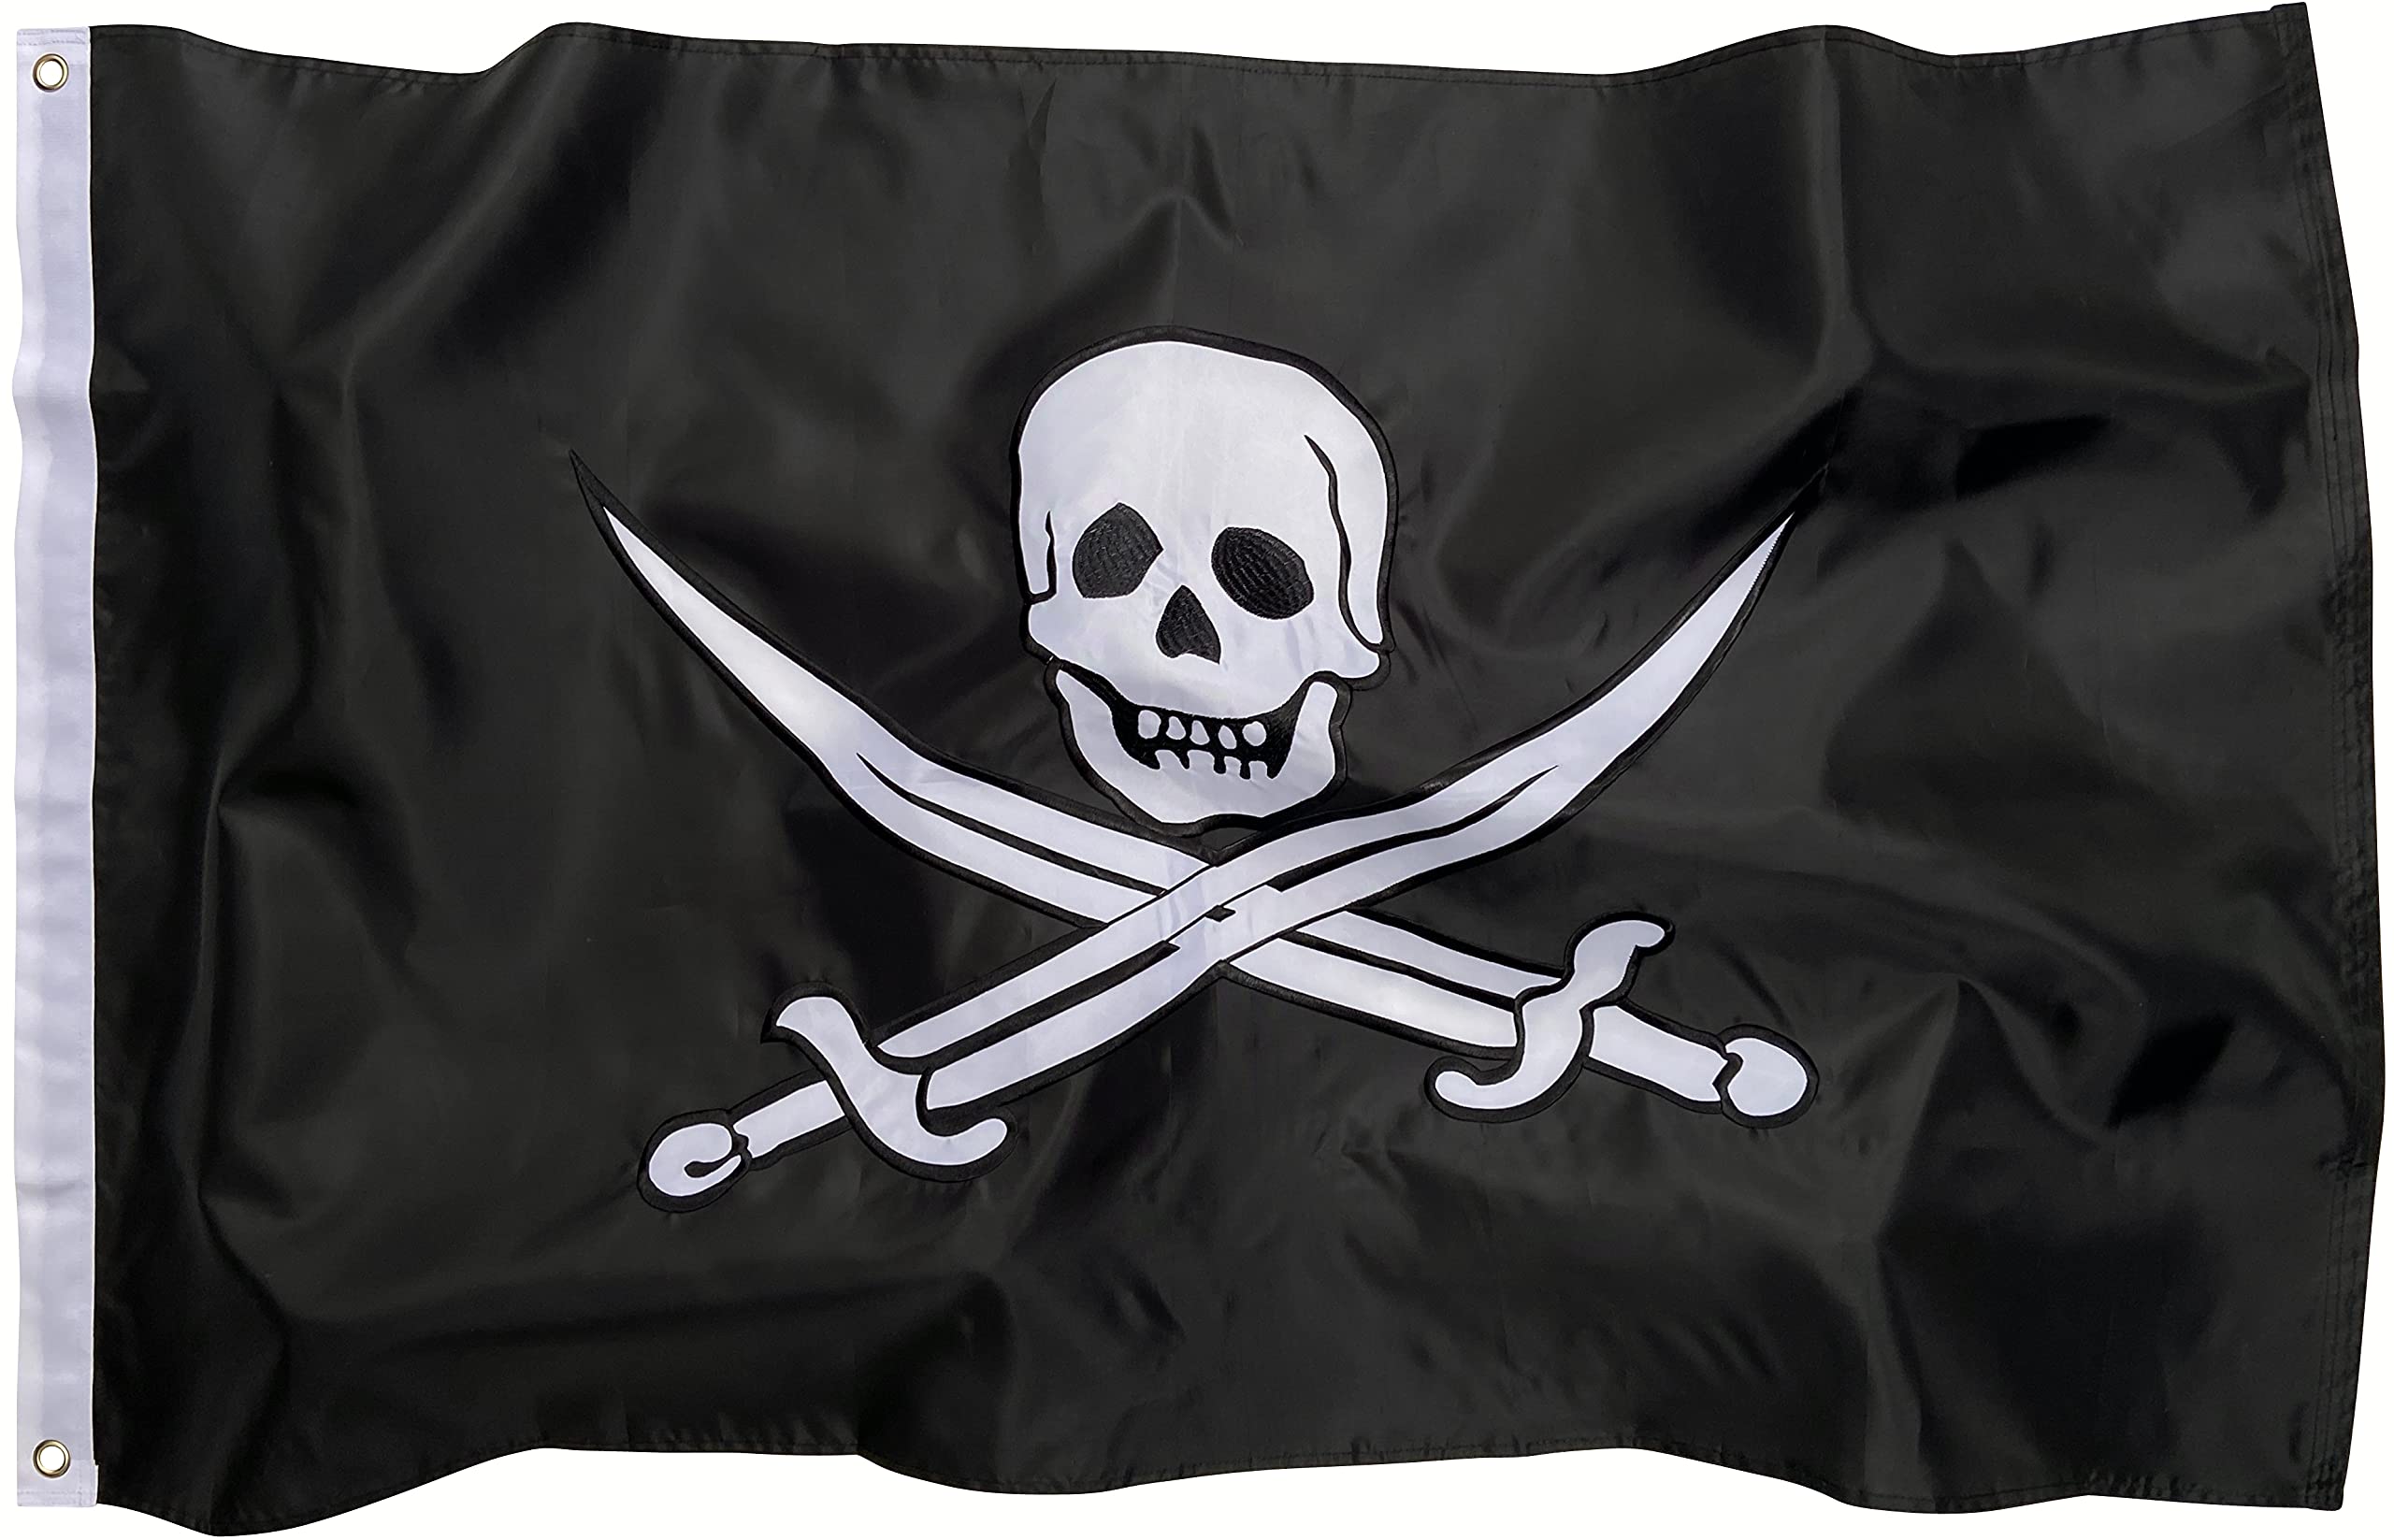 Pirate Flag - 3X5 Foot Outdoor Nylon Jolly Roger Banner Double Sided  Embroidery Featuring Skull and Swords (